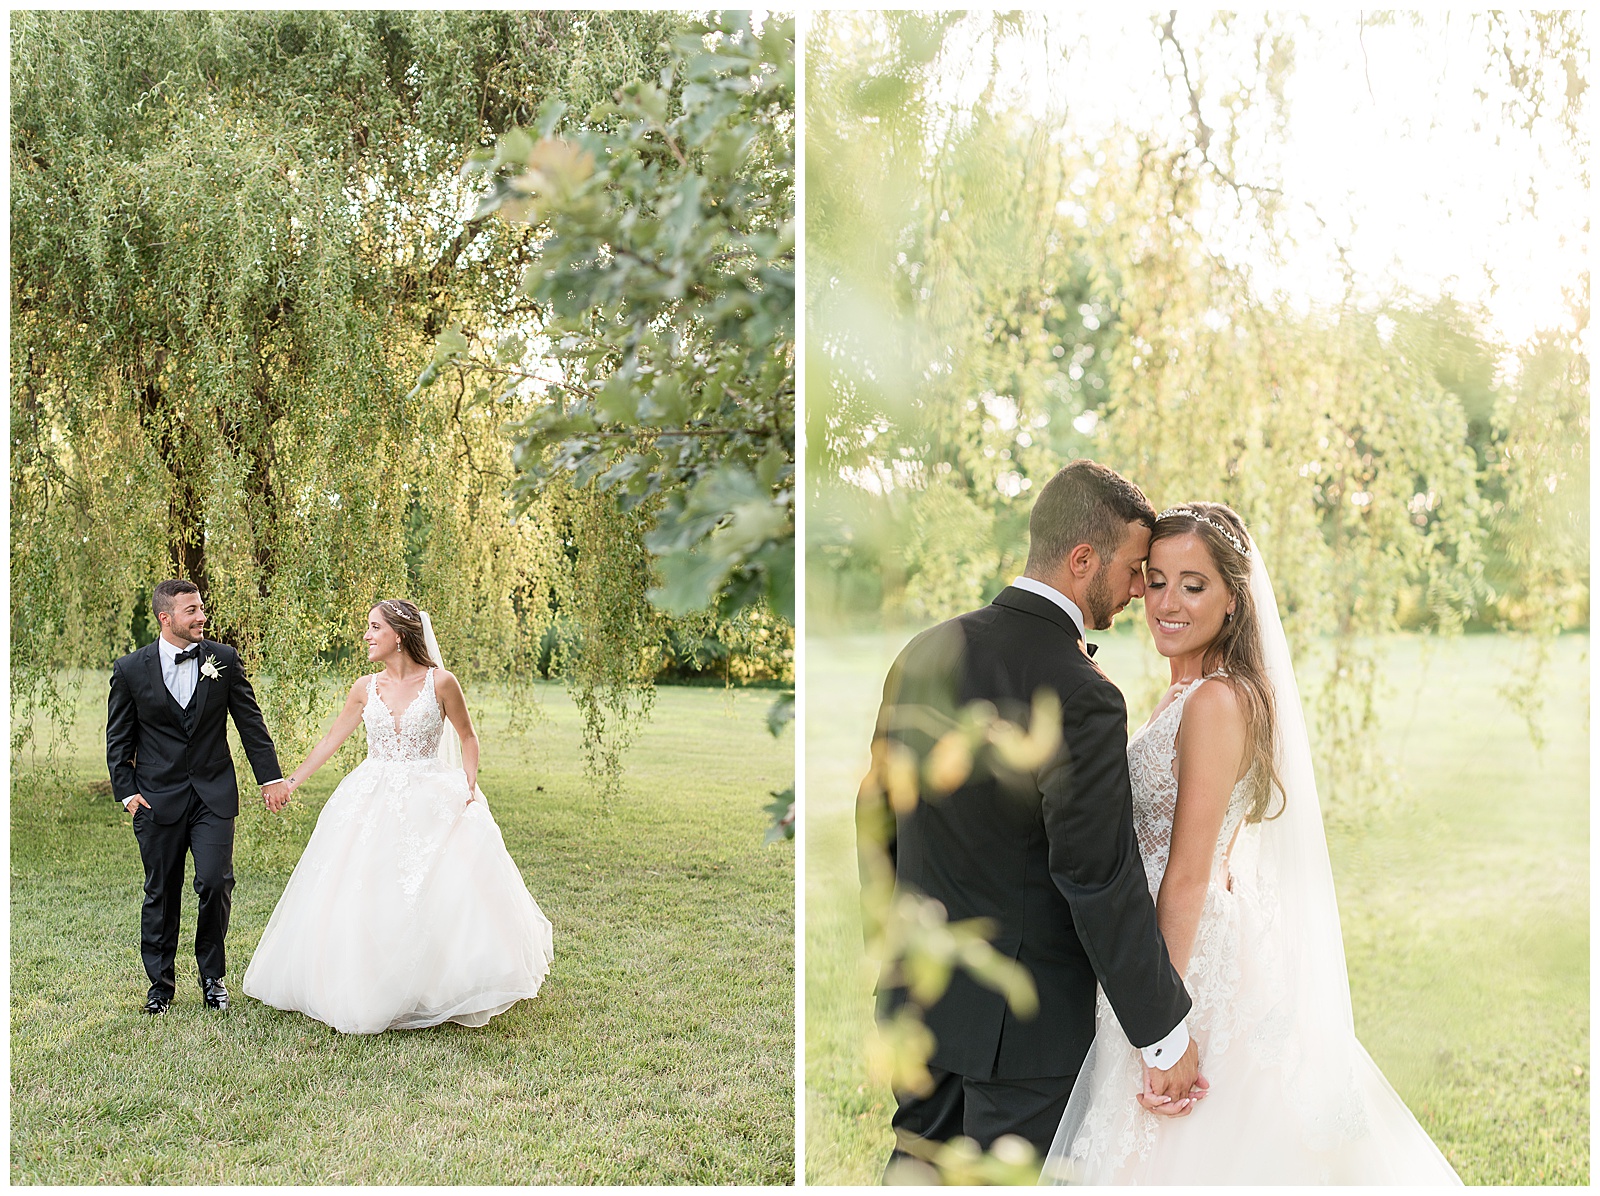 bride and groom sharing an intimate moment with willow tree leaves floating around them